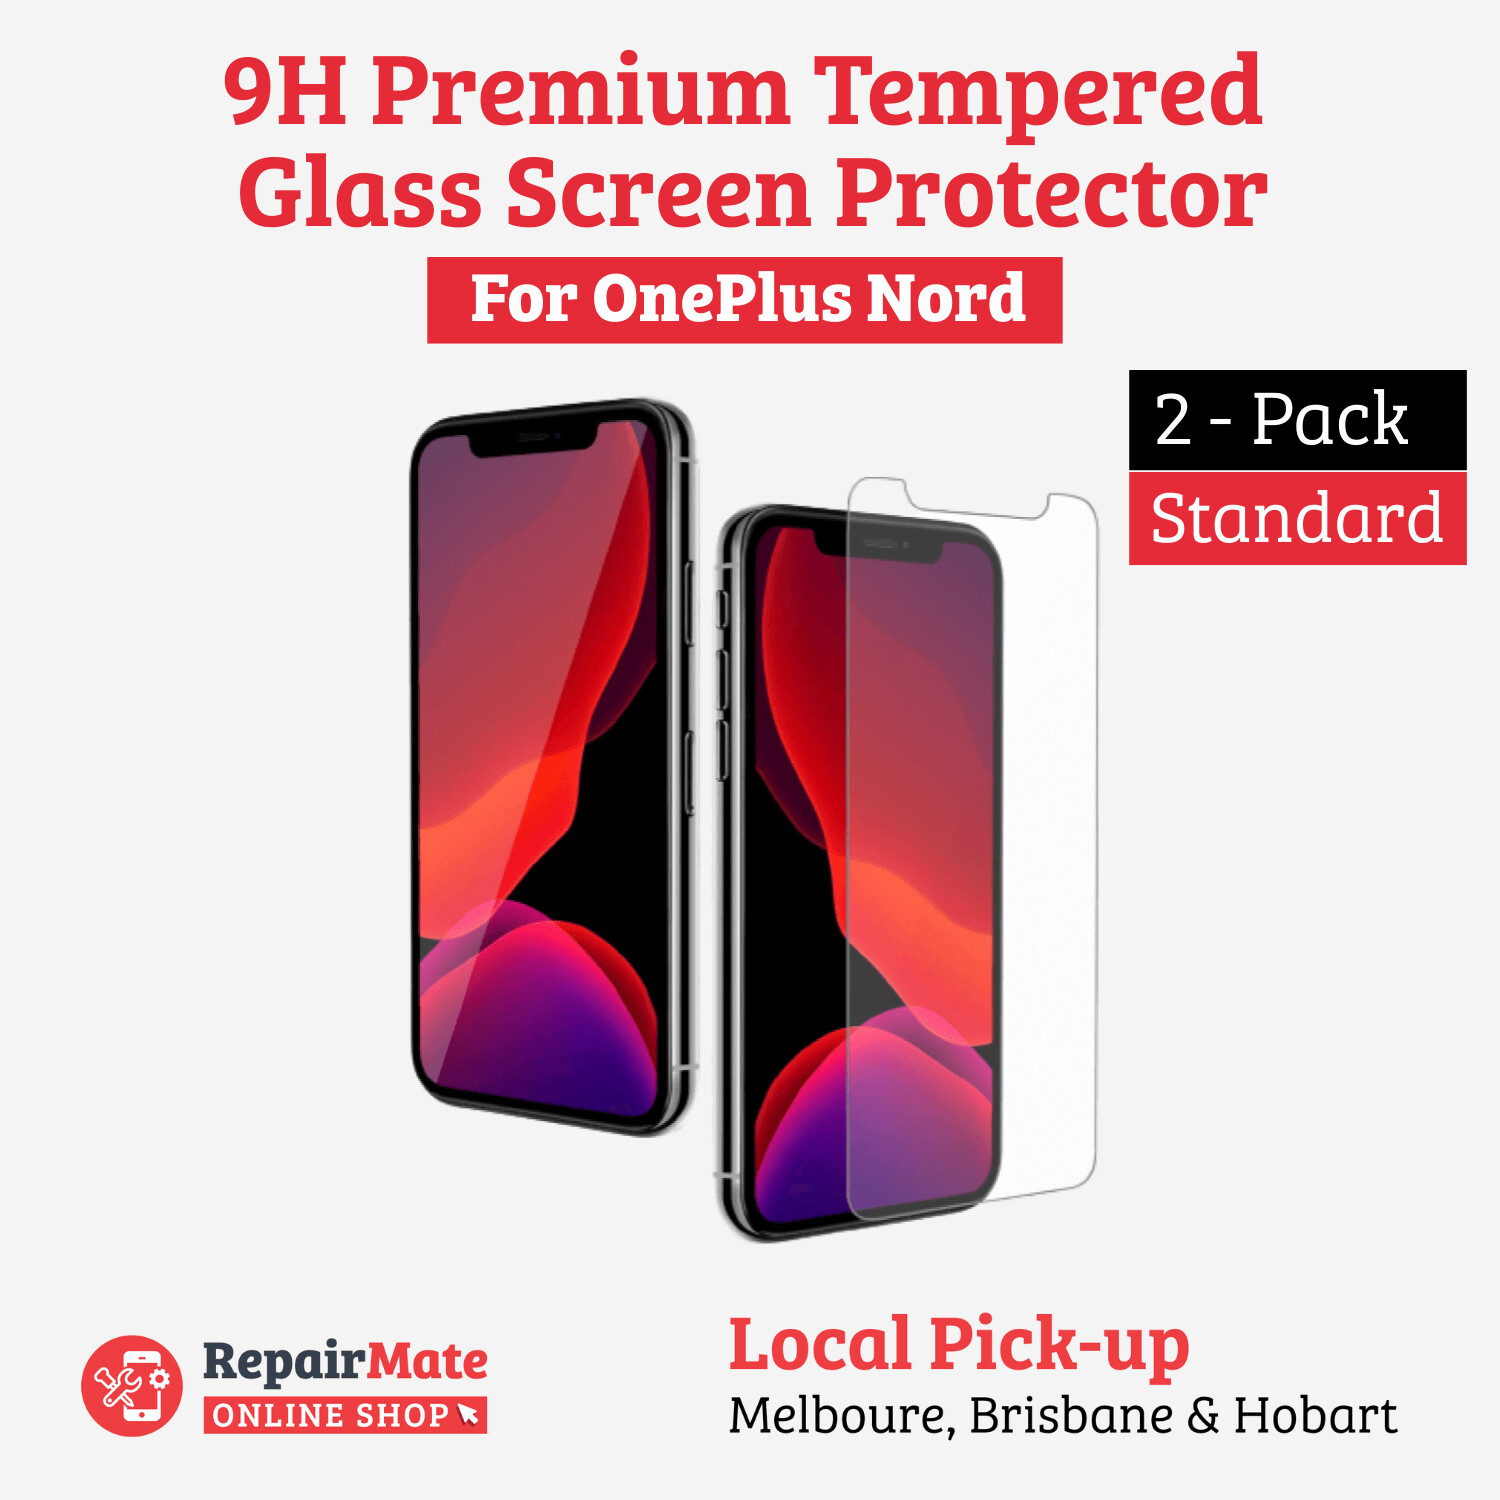 OnePlus Nord 9H Premium Tempered Glass Screen Protector [2 Pack]